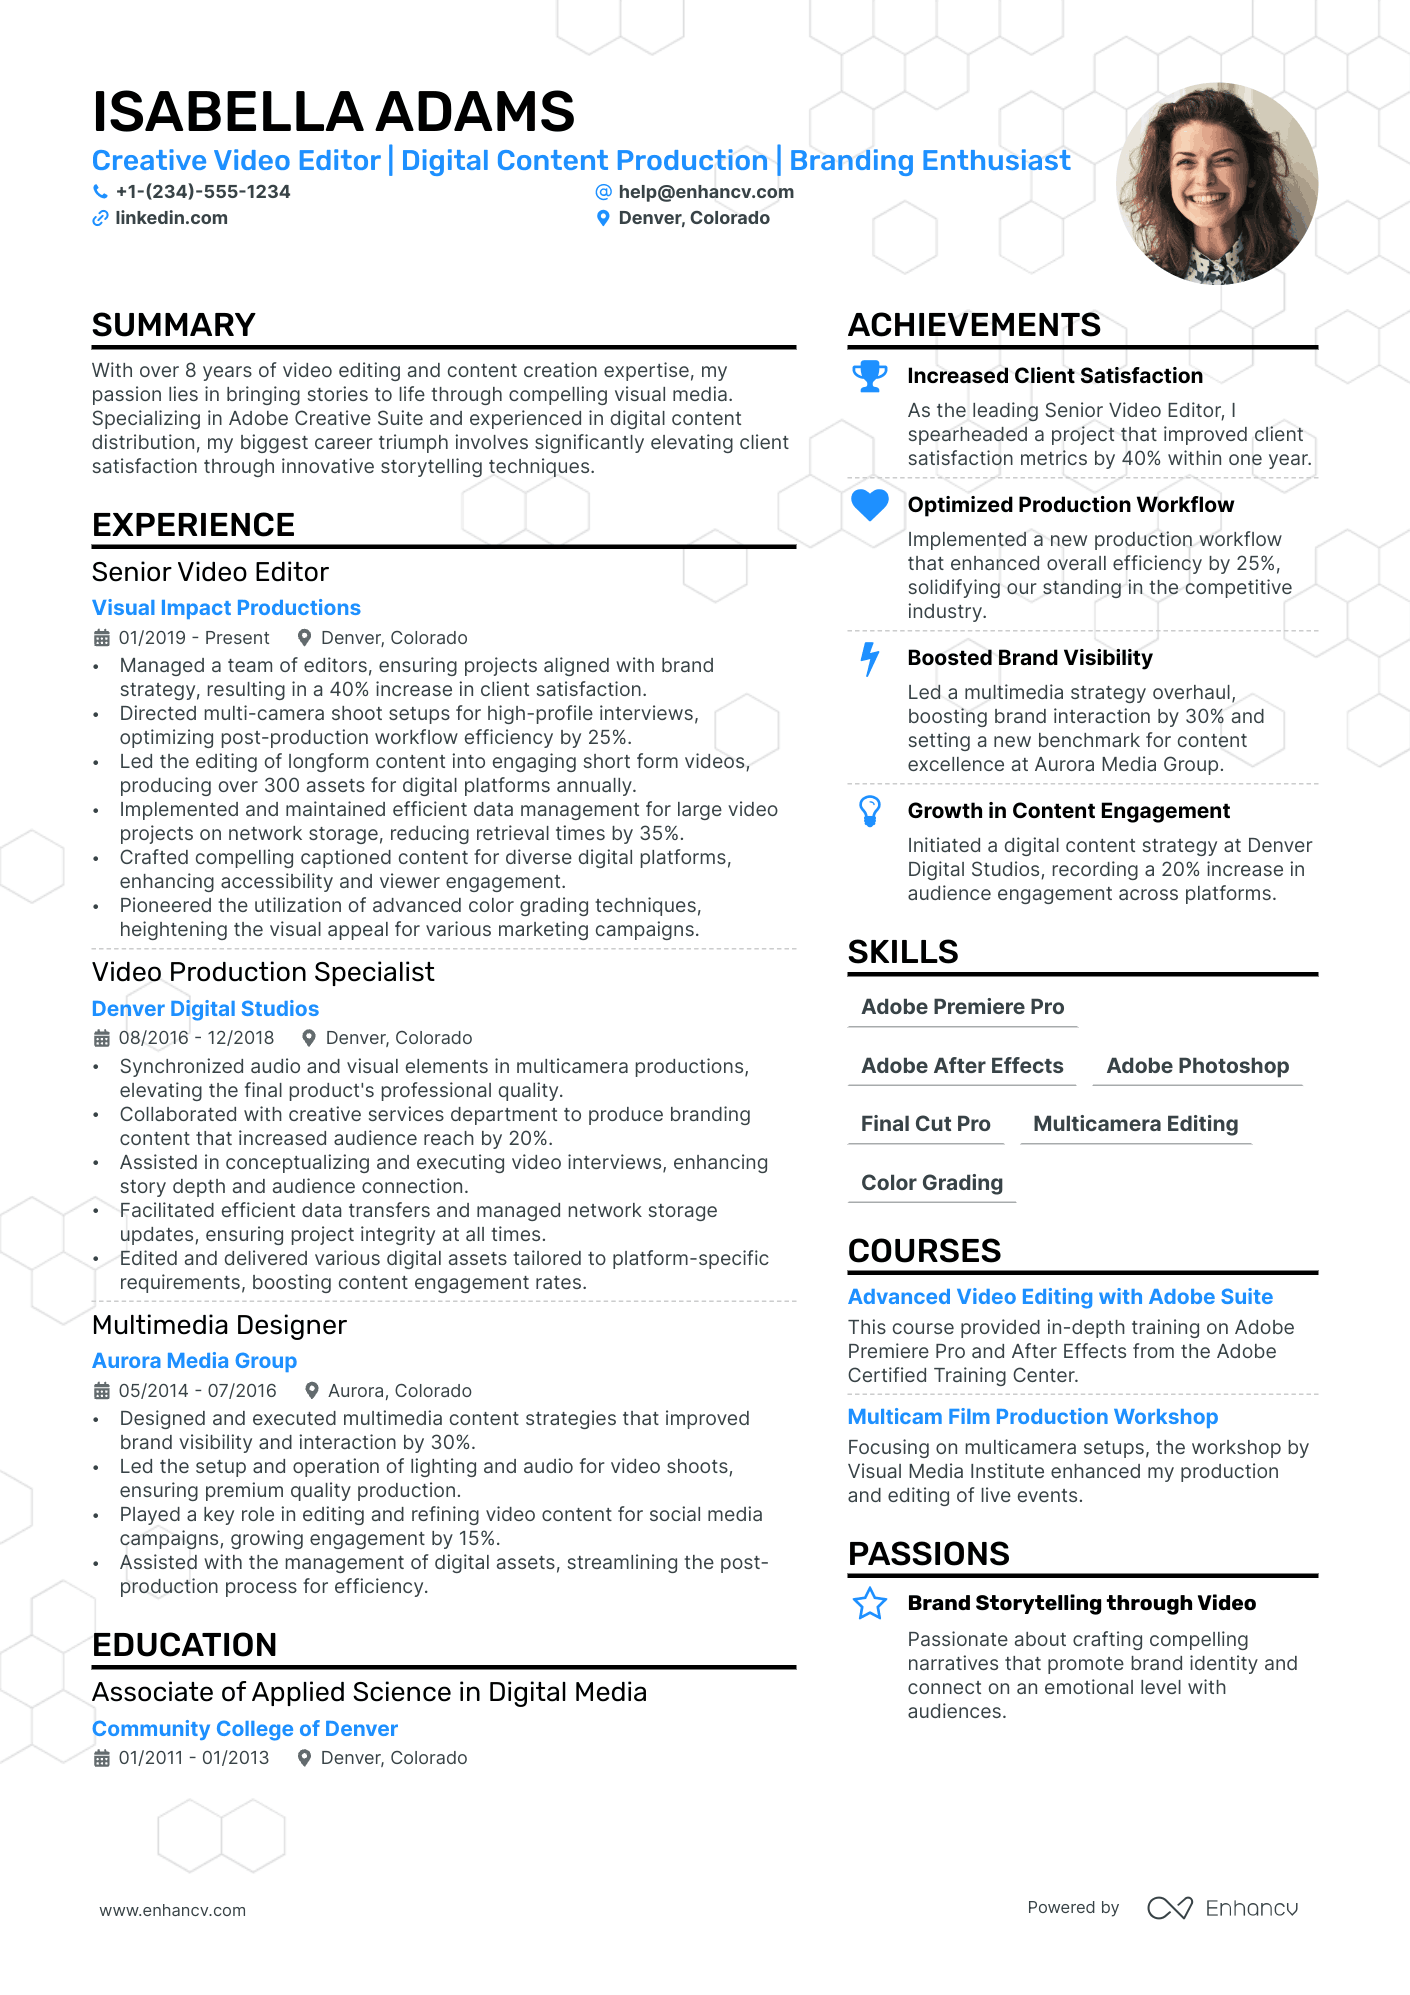 Assistant Video Editor resume example